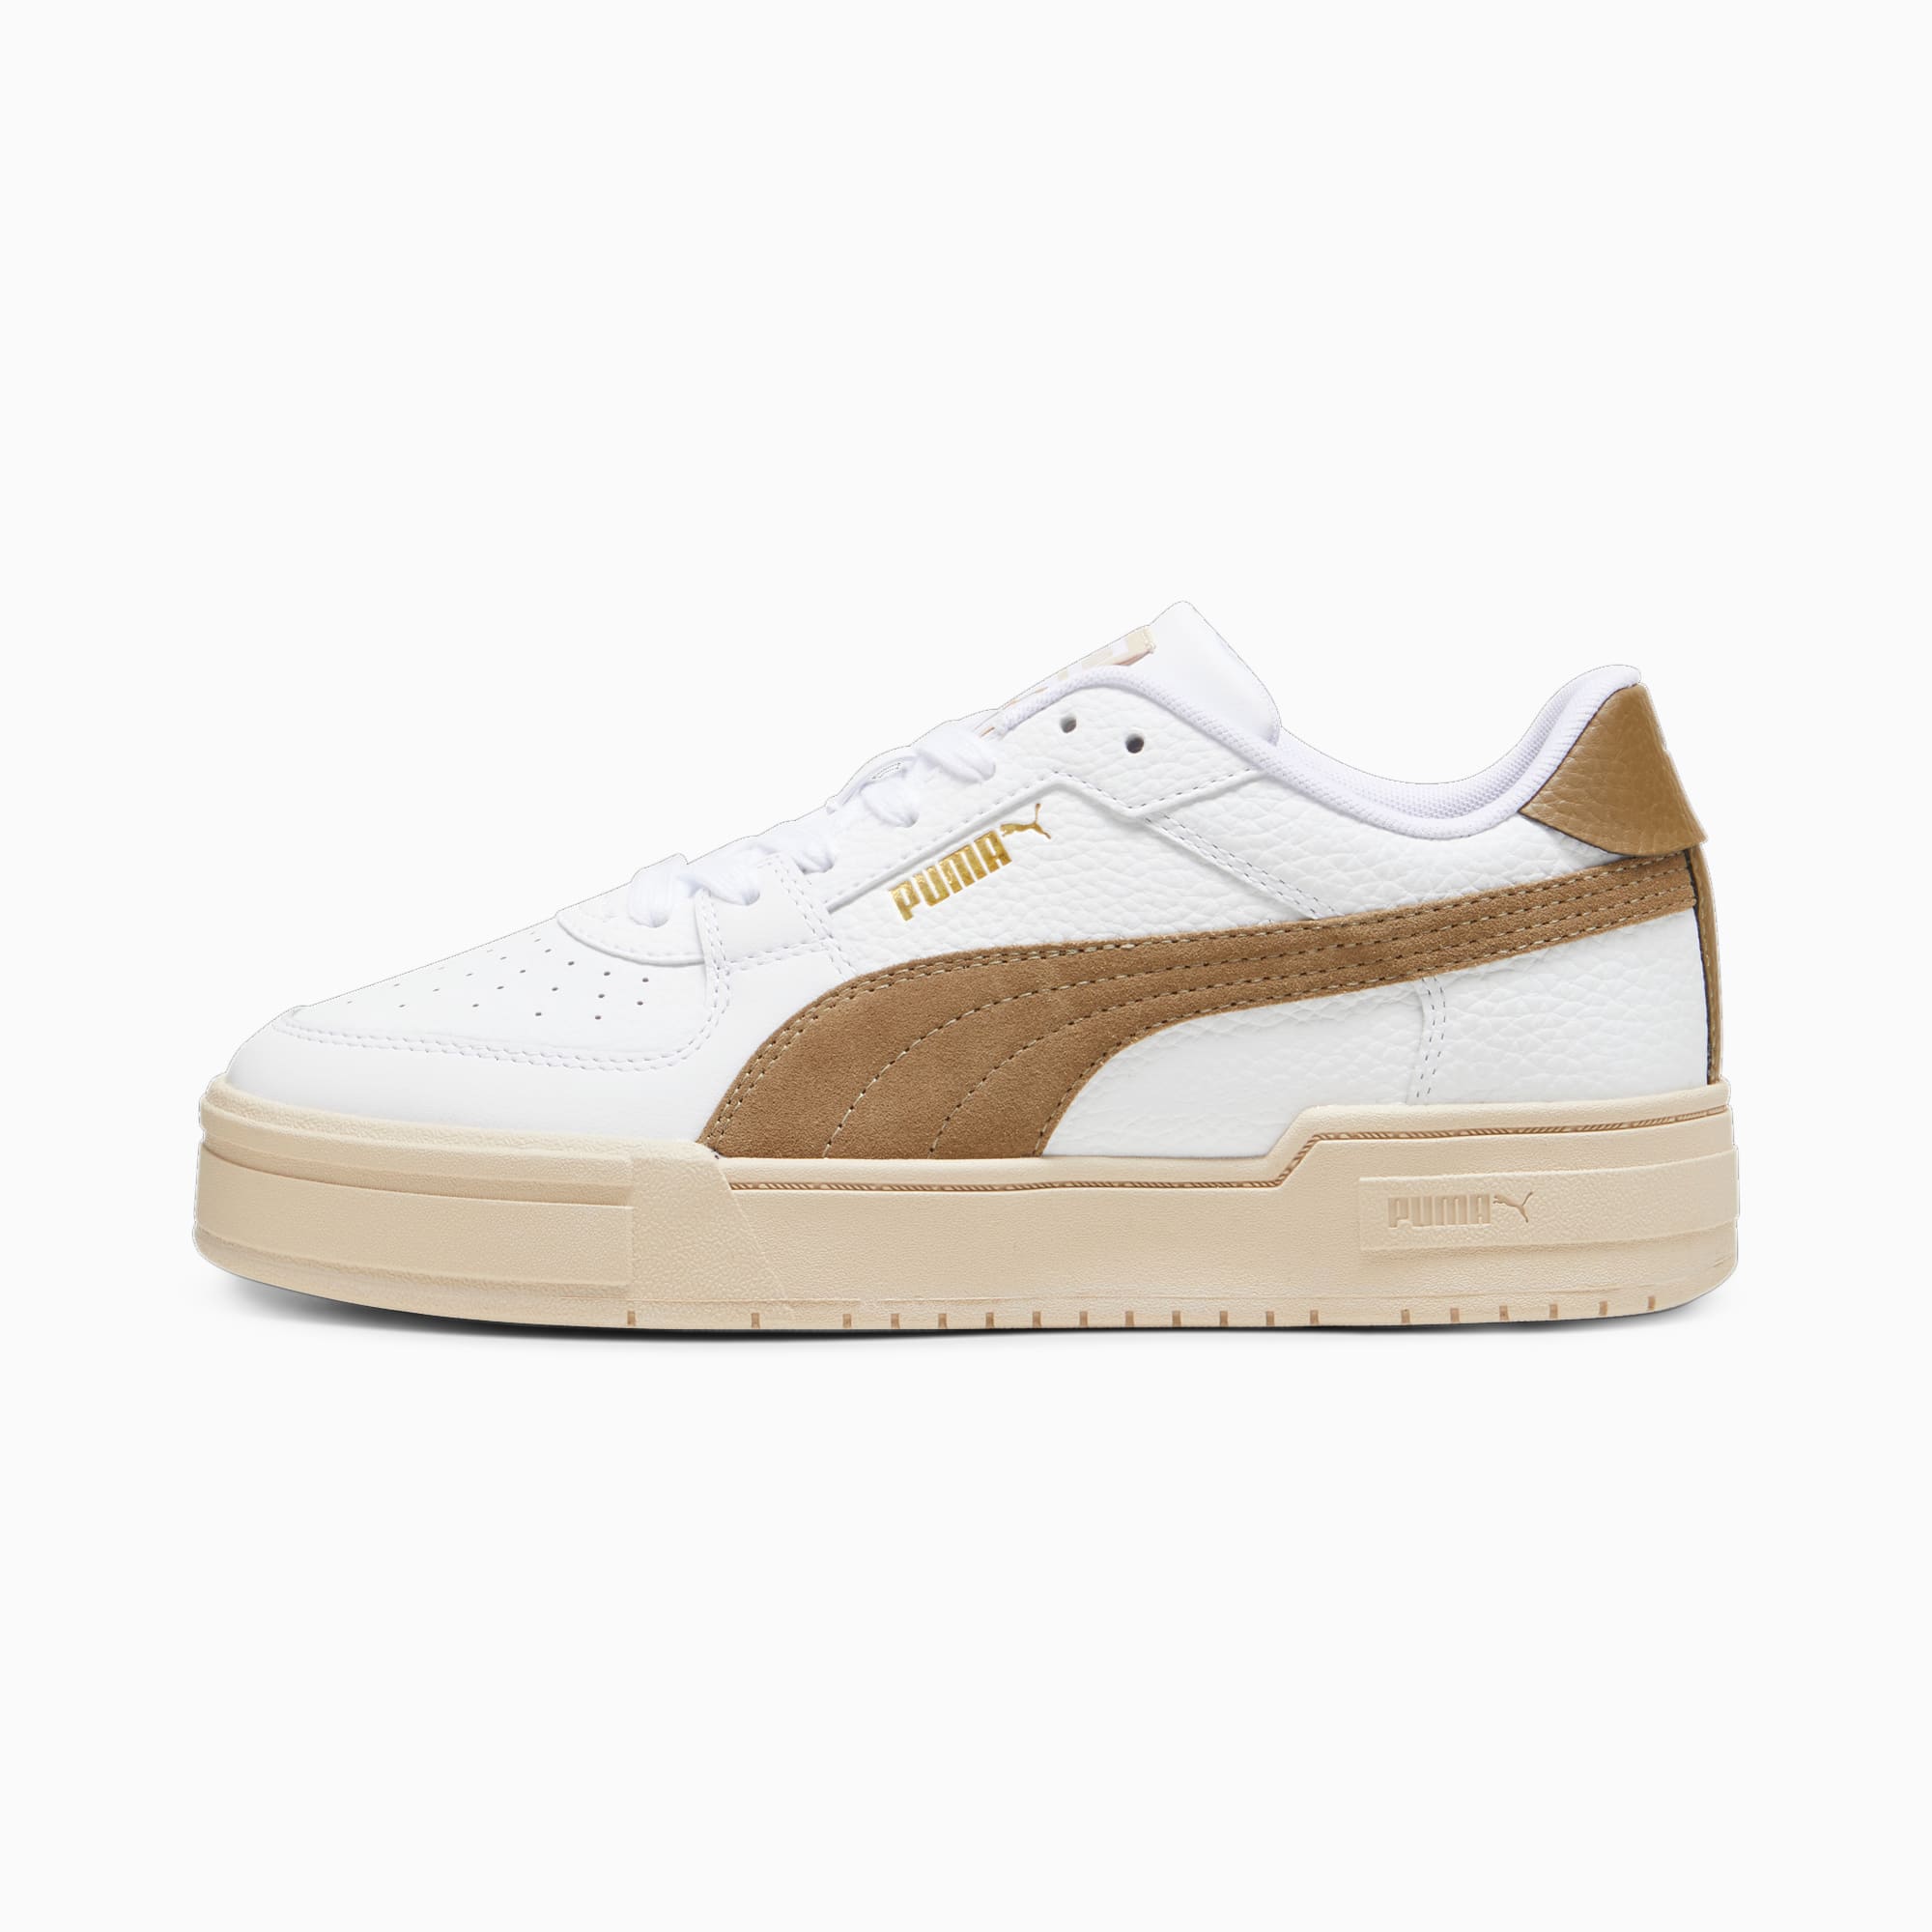 PUMA Chaussure Sneakers CA Pro OW, Blanc/Or/Marron